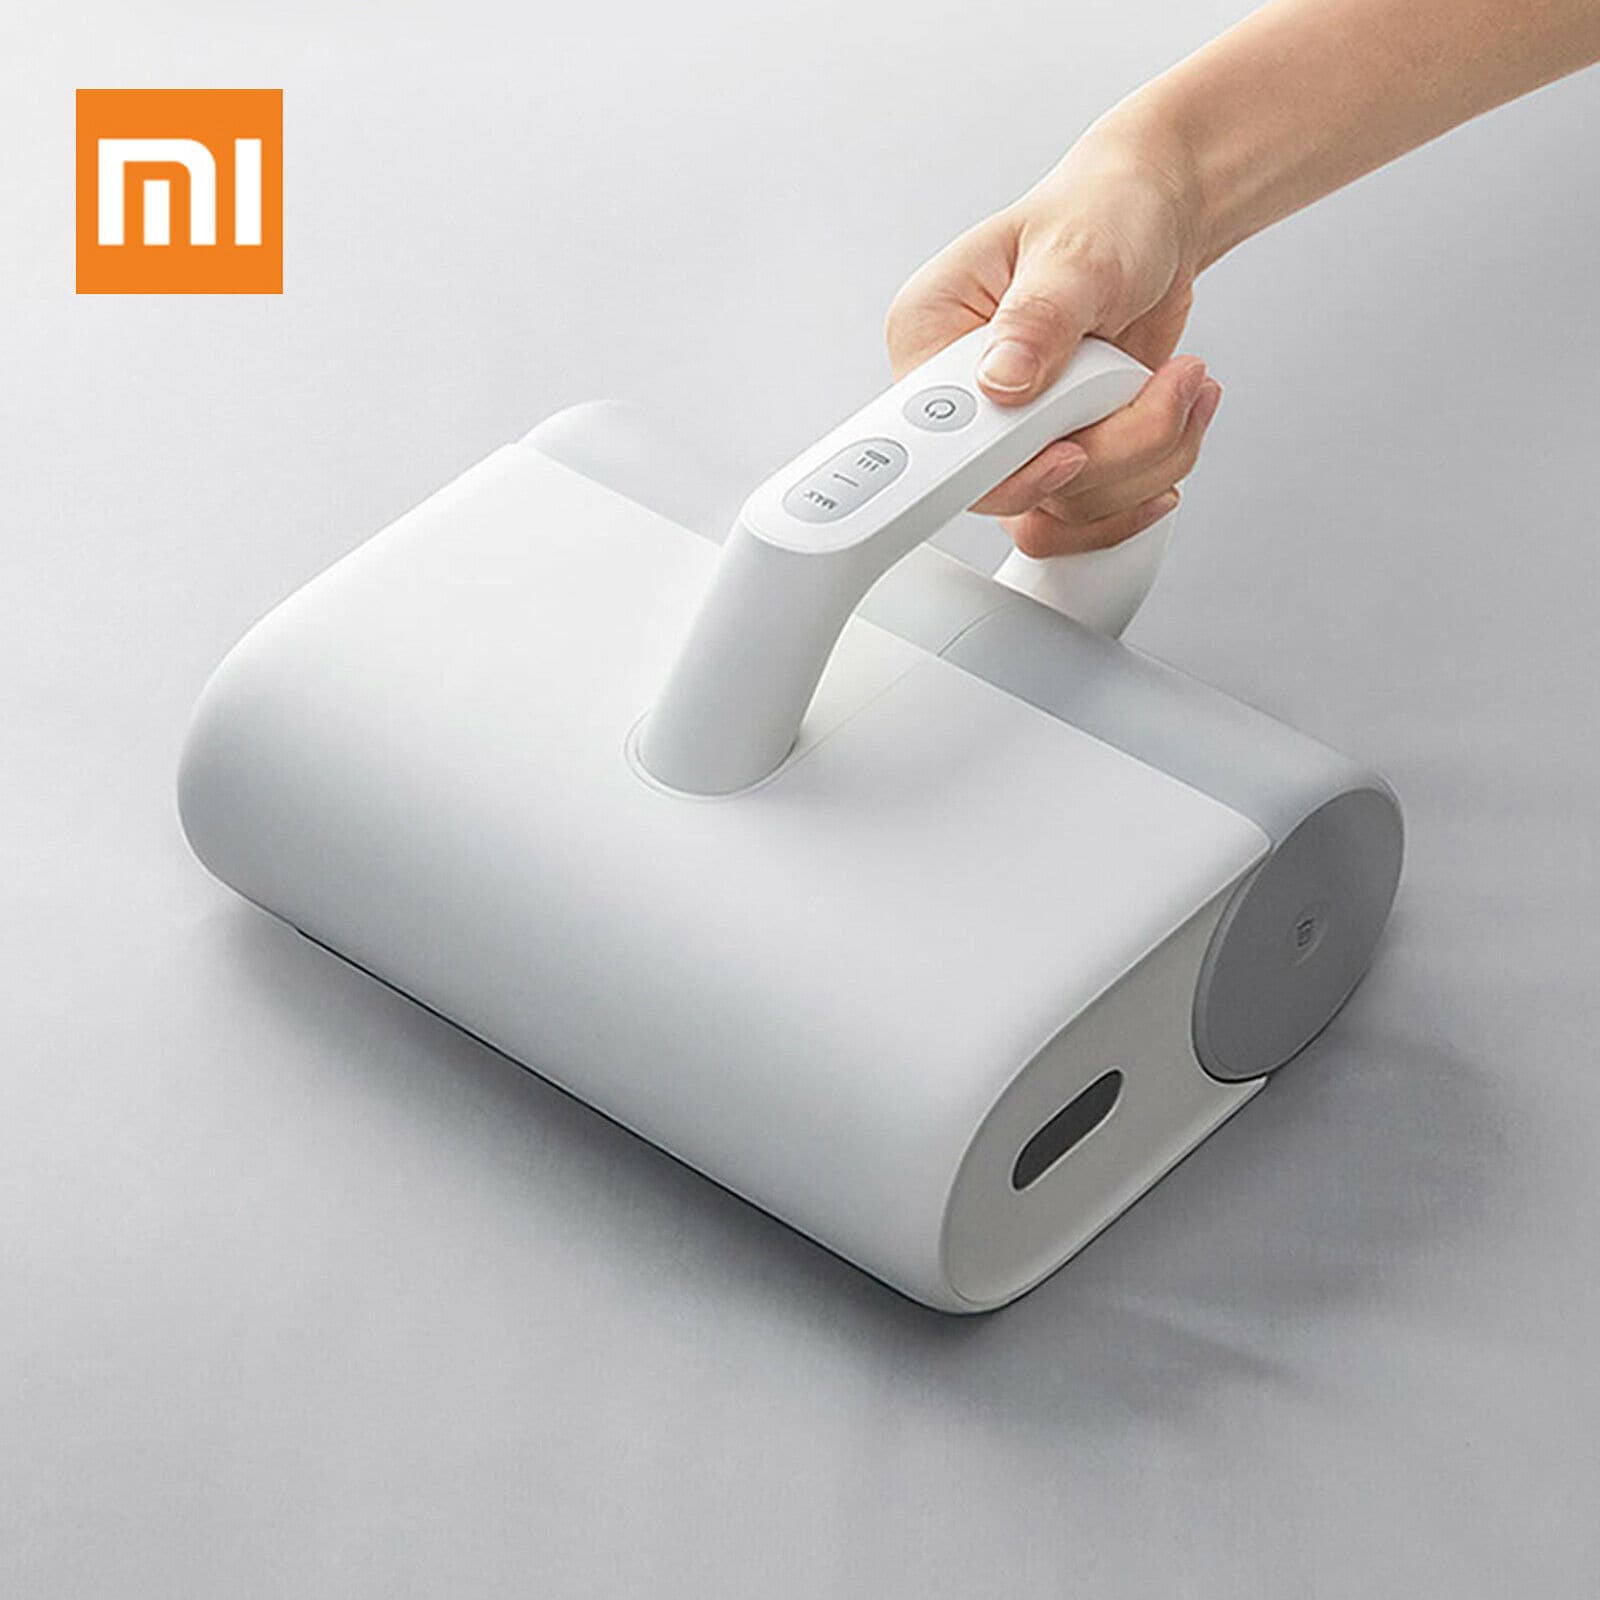 Xiaomi mite removal instrument home bed vacuum cleaner ultraviolet sterilization machine to remove mites Cleaning Machin White - 1